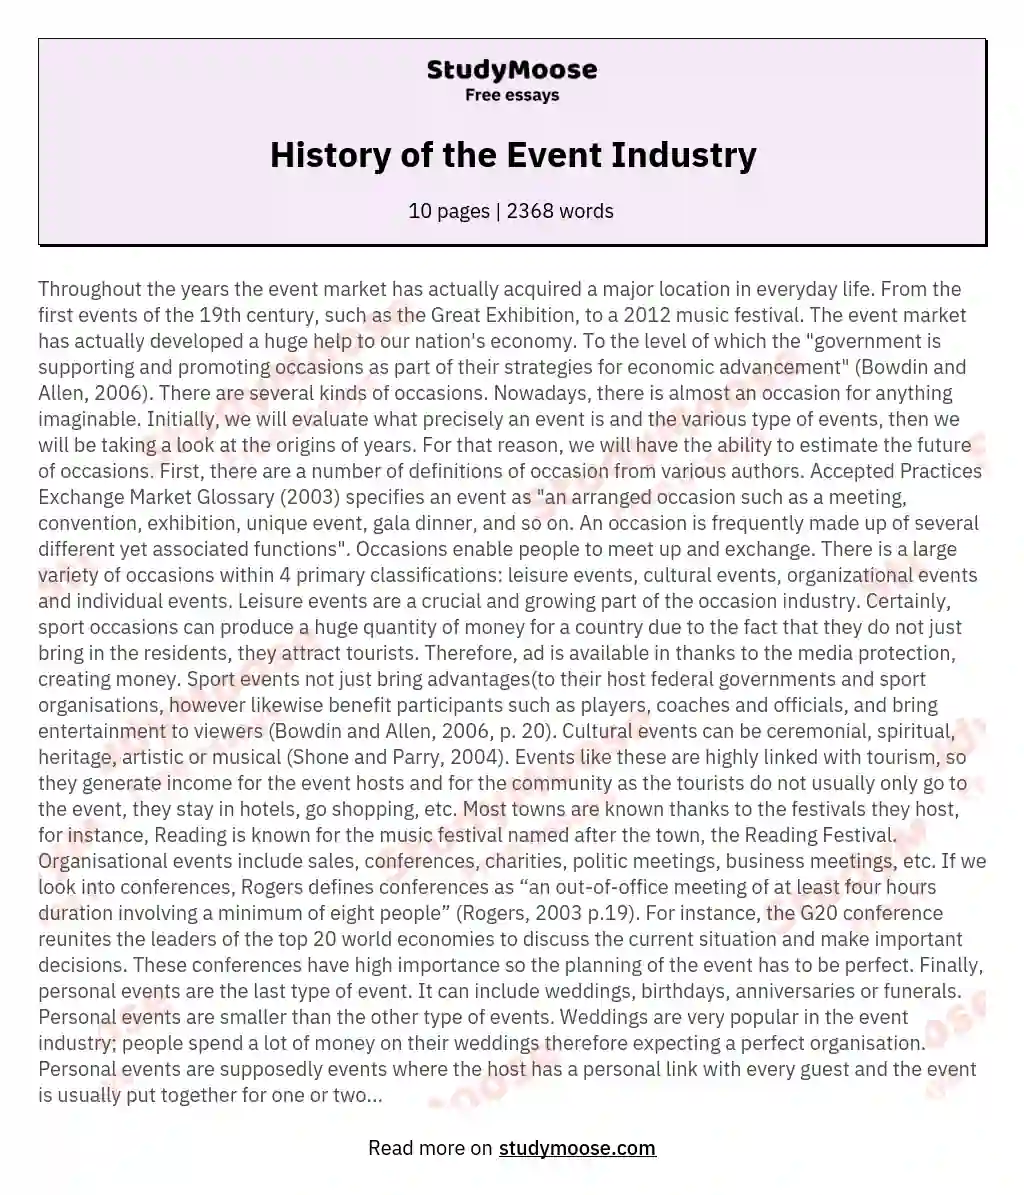 History of the Event Industry essay